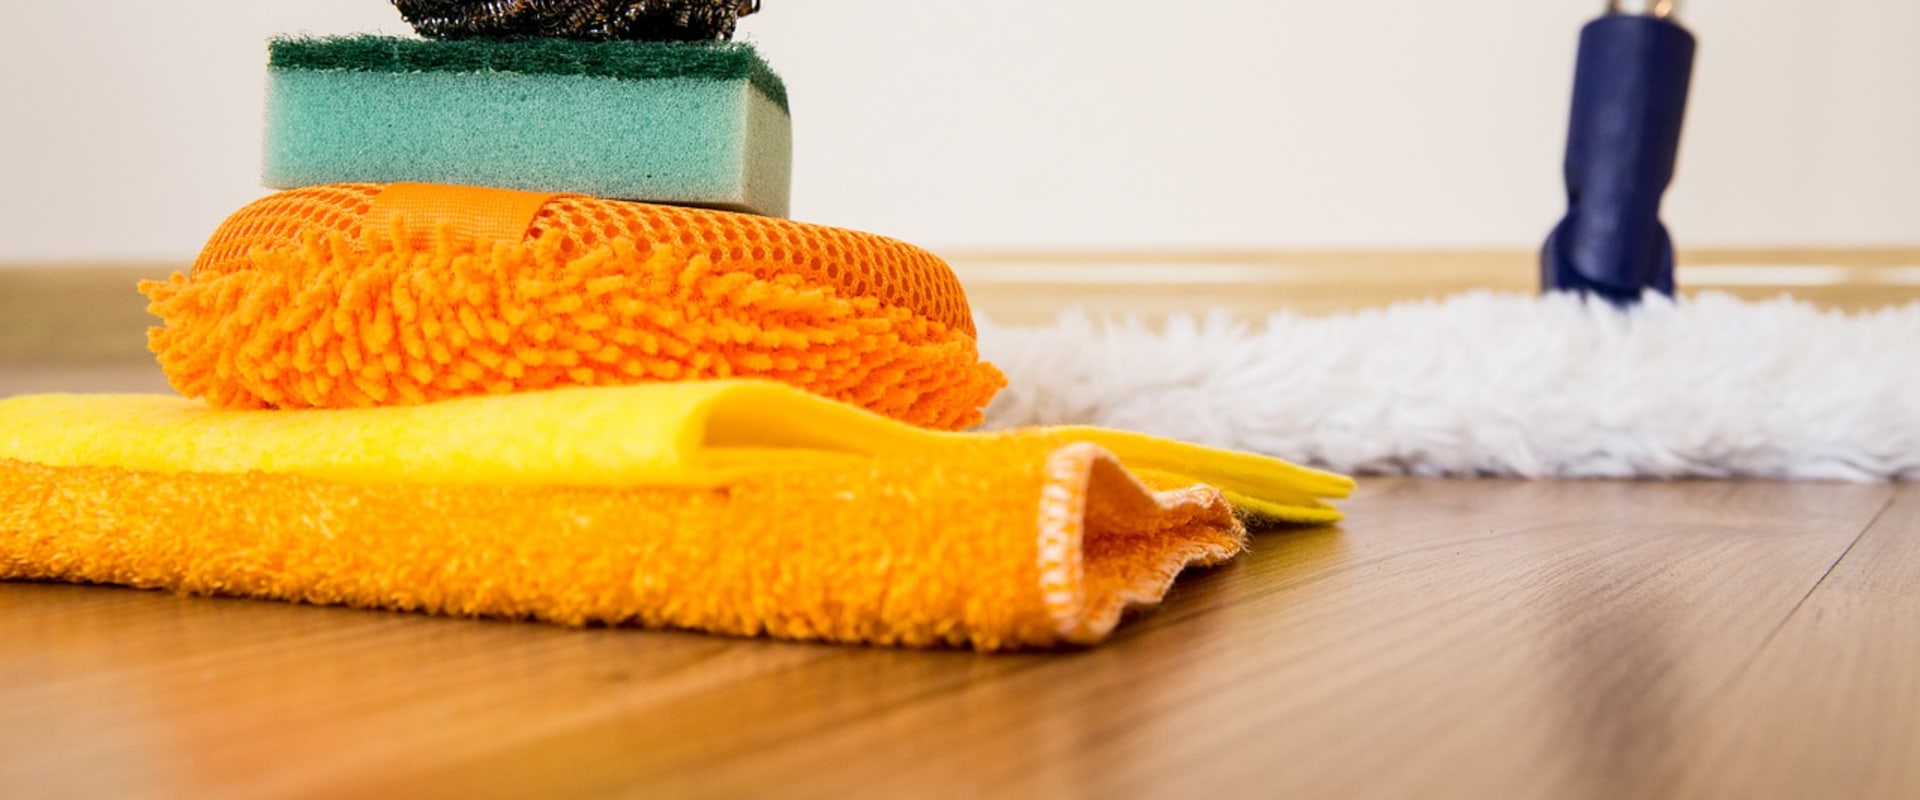 Can I Request Specific Cleaning Products or Methods from the Cleaning Company?